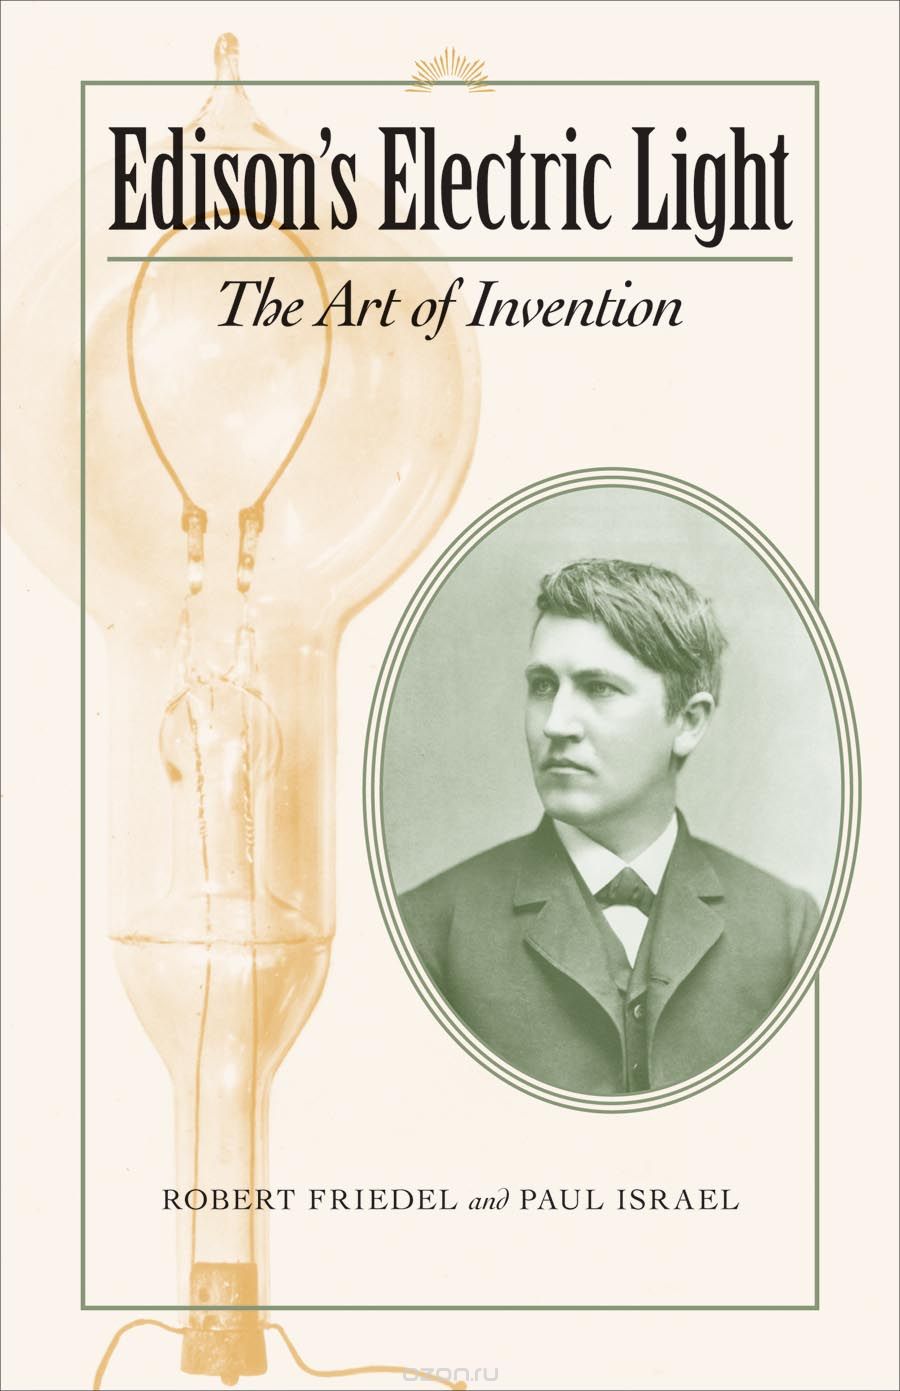 Edison?s Electric Light – The Art of Invention